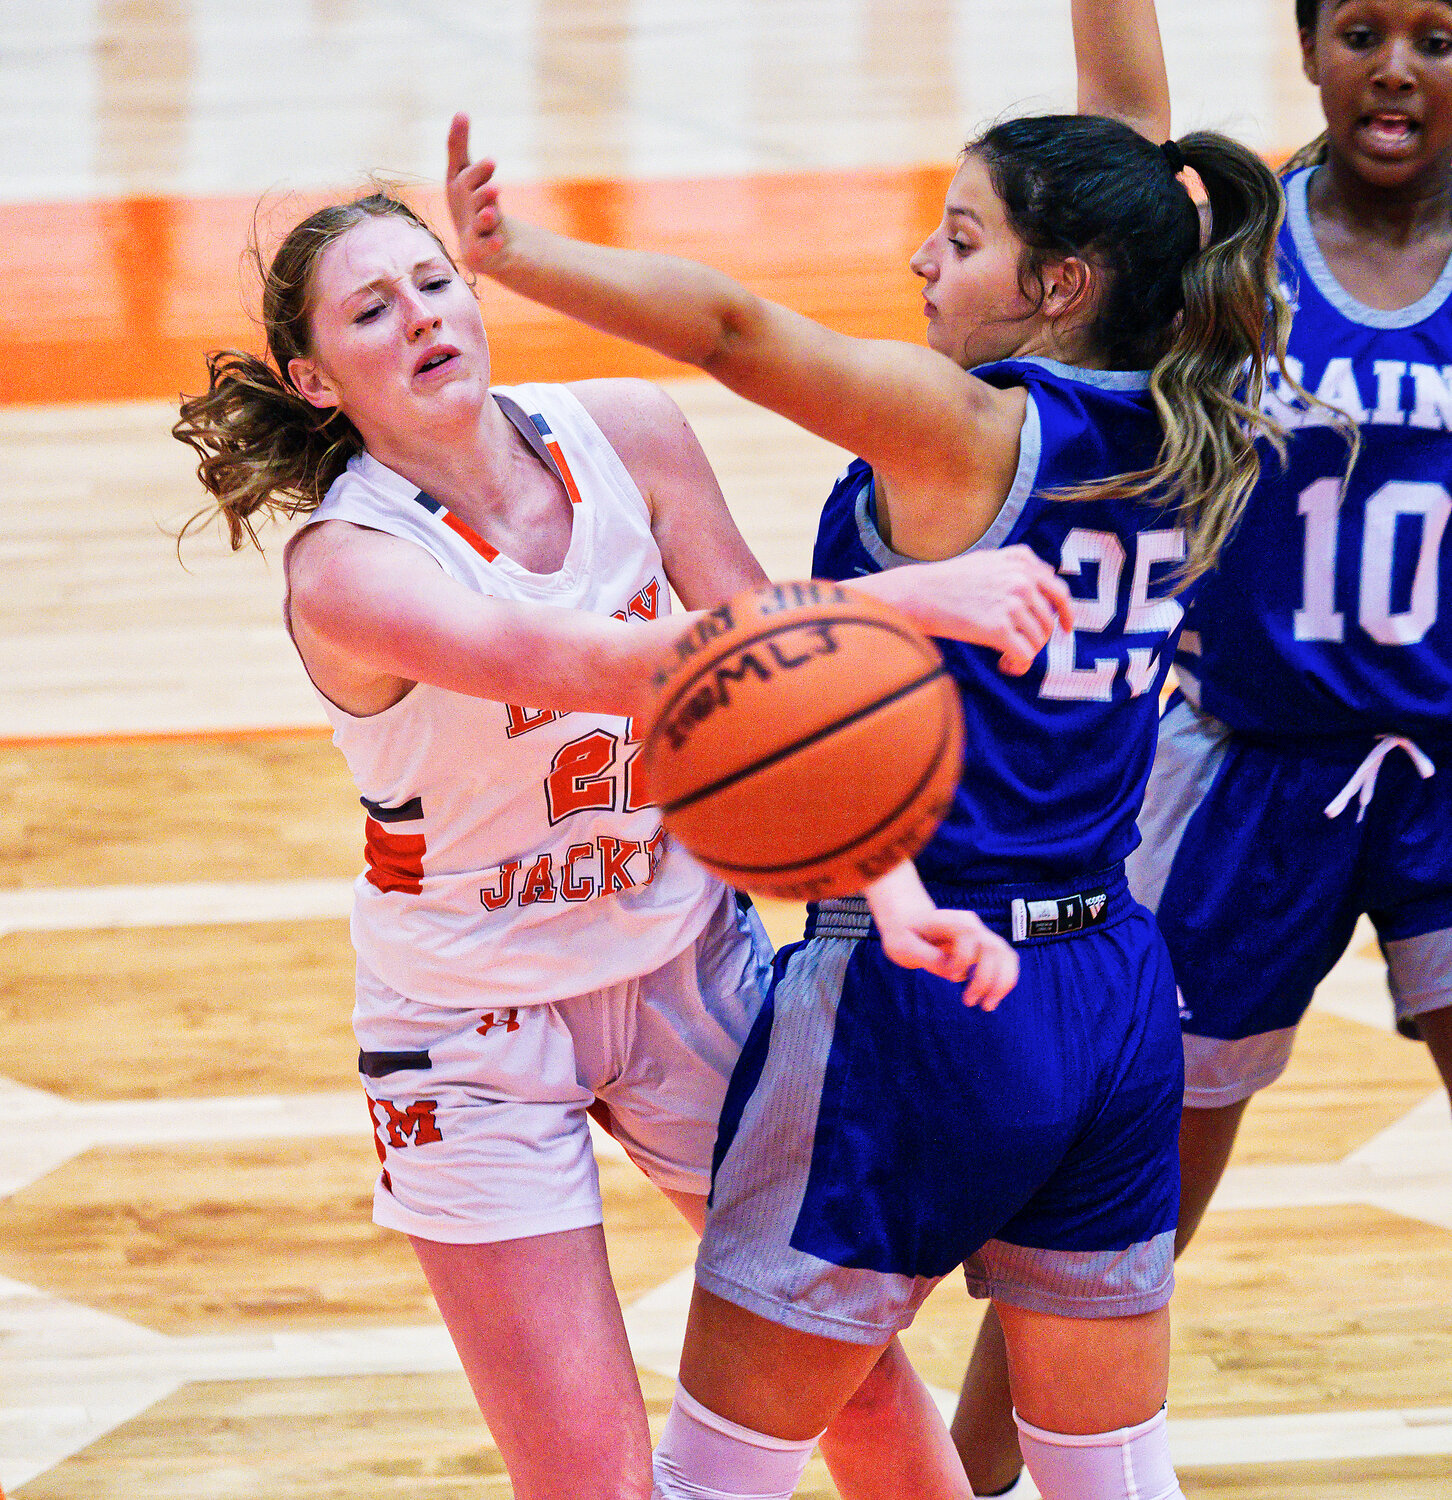 Macy Fischer dishes the ball along the baseline. [more hoops highlights here]